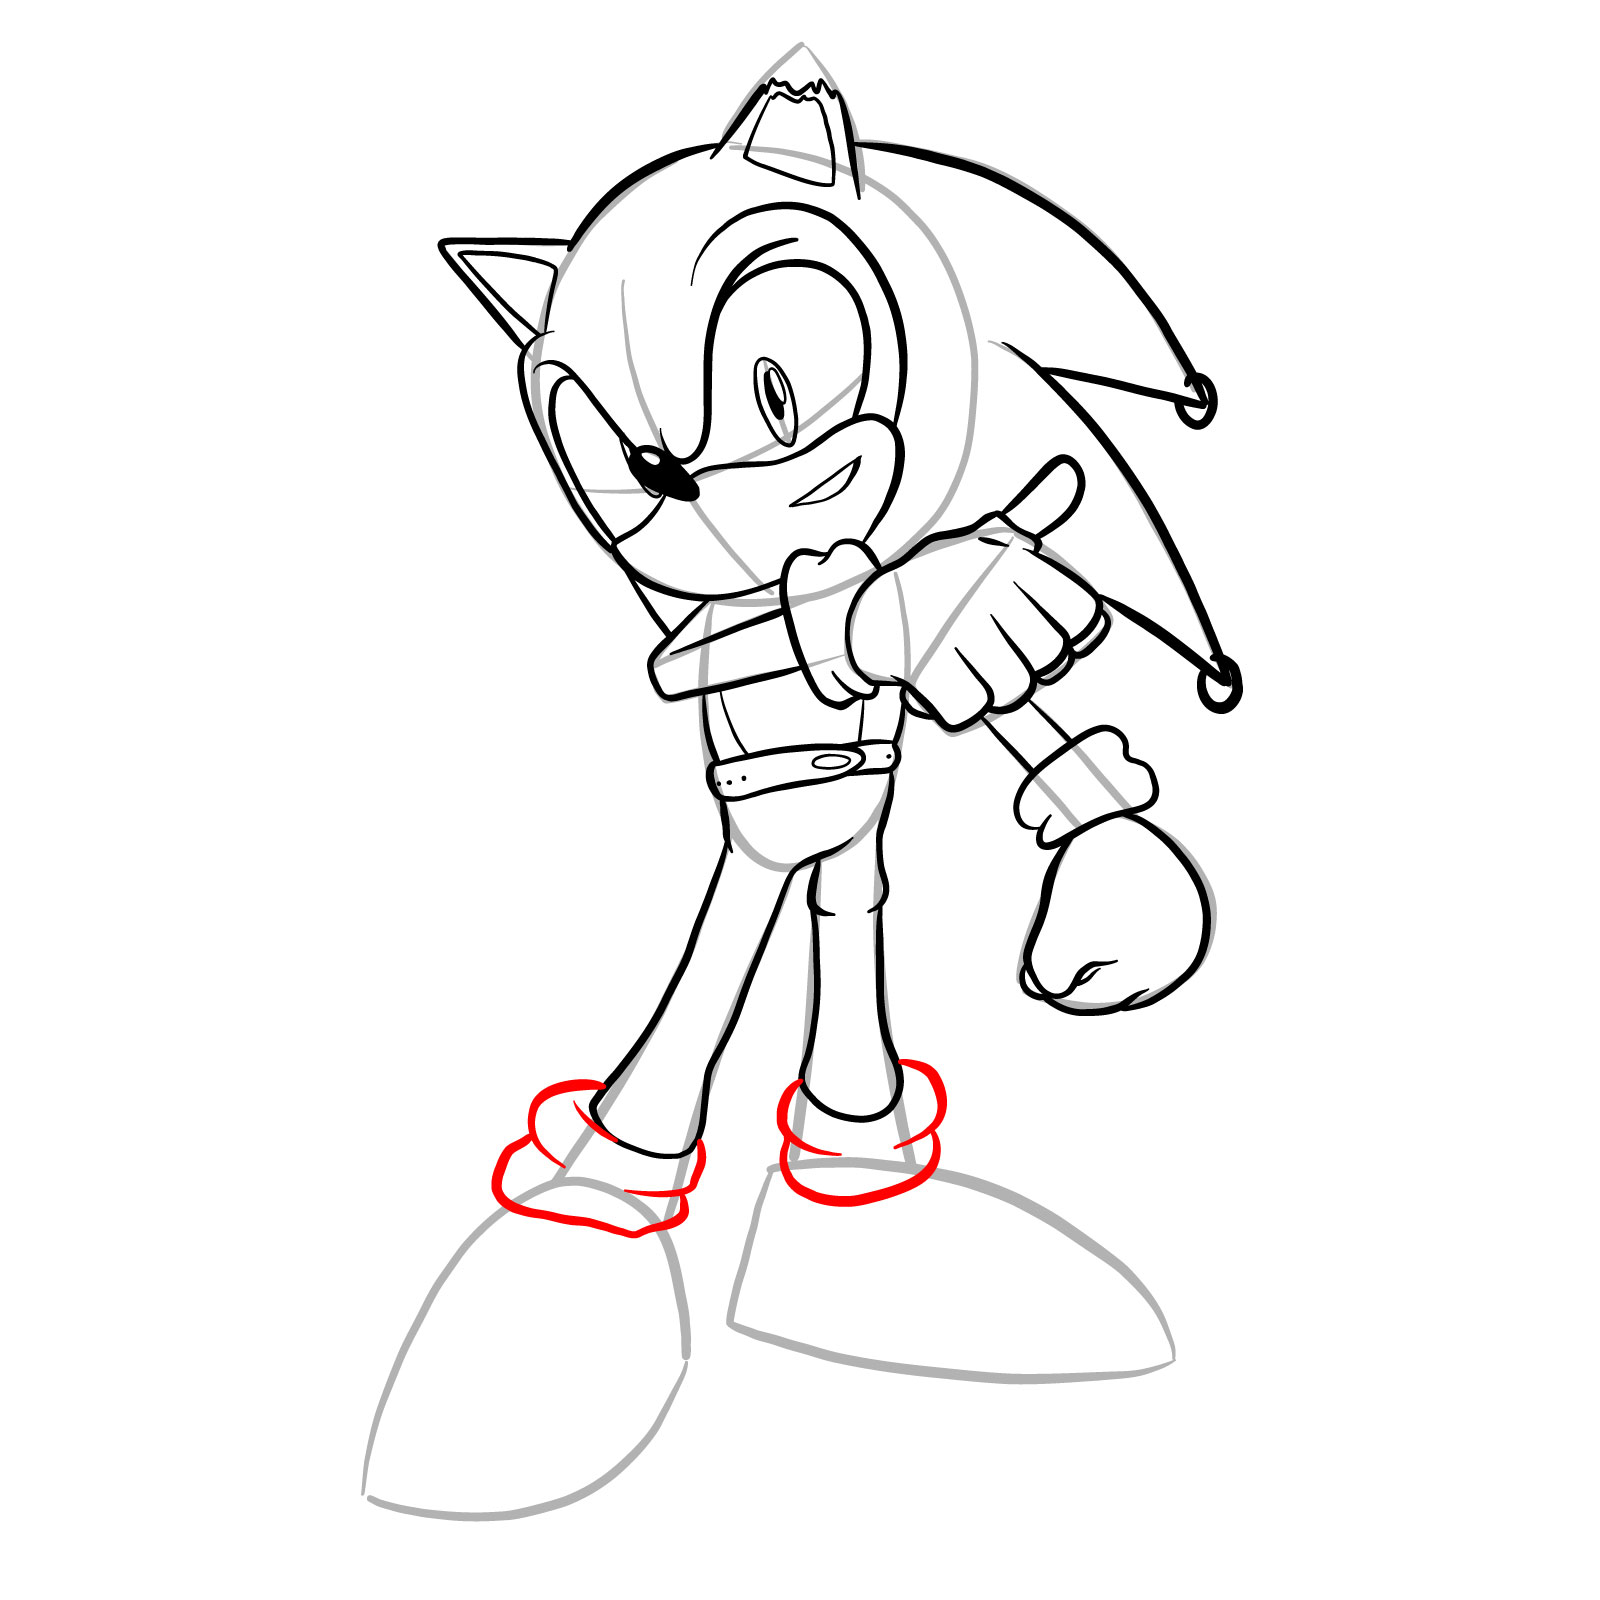 How to draw Coldsteel the Hedgehog - step 26